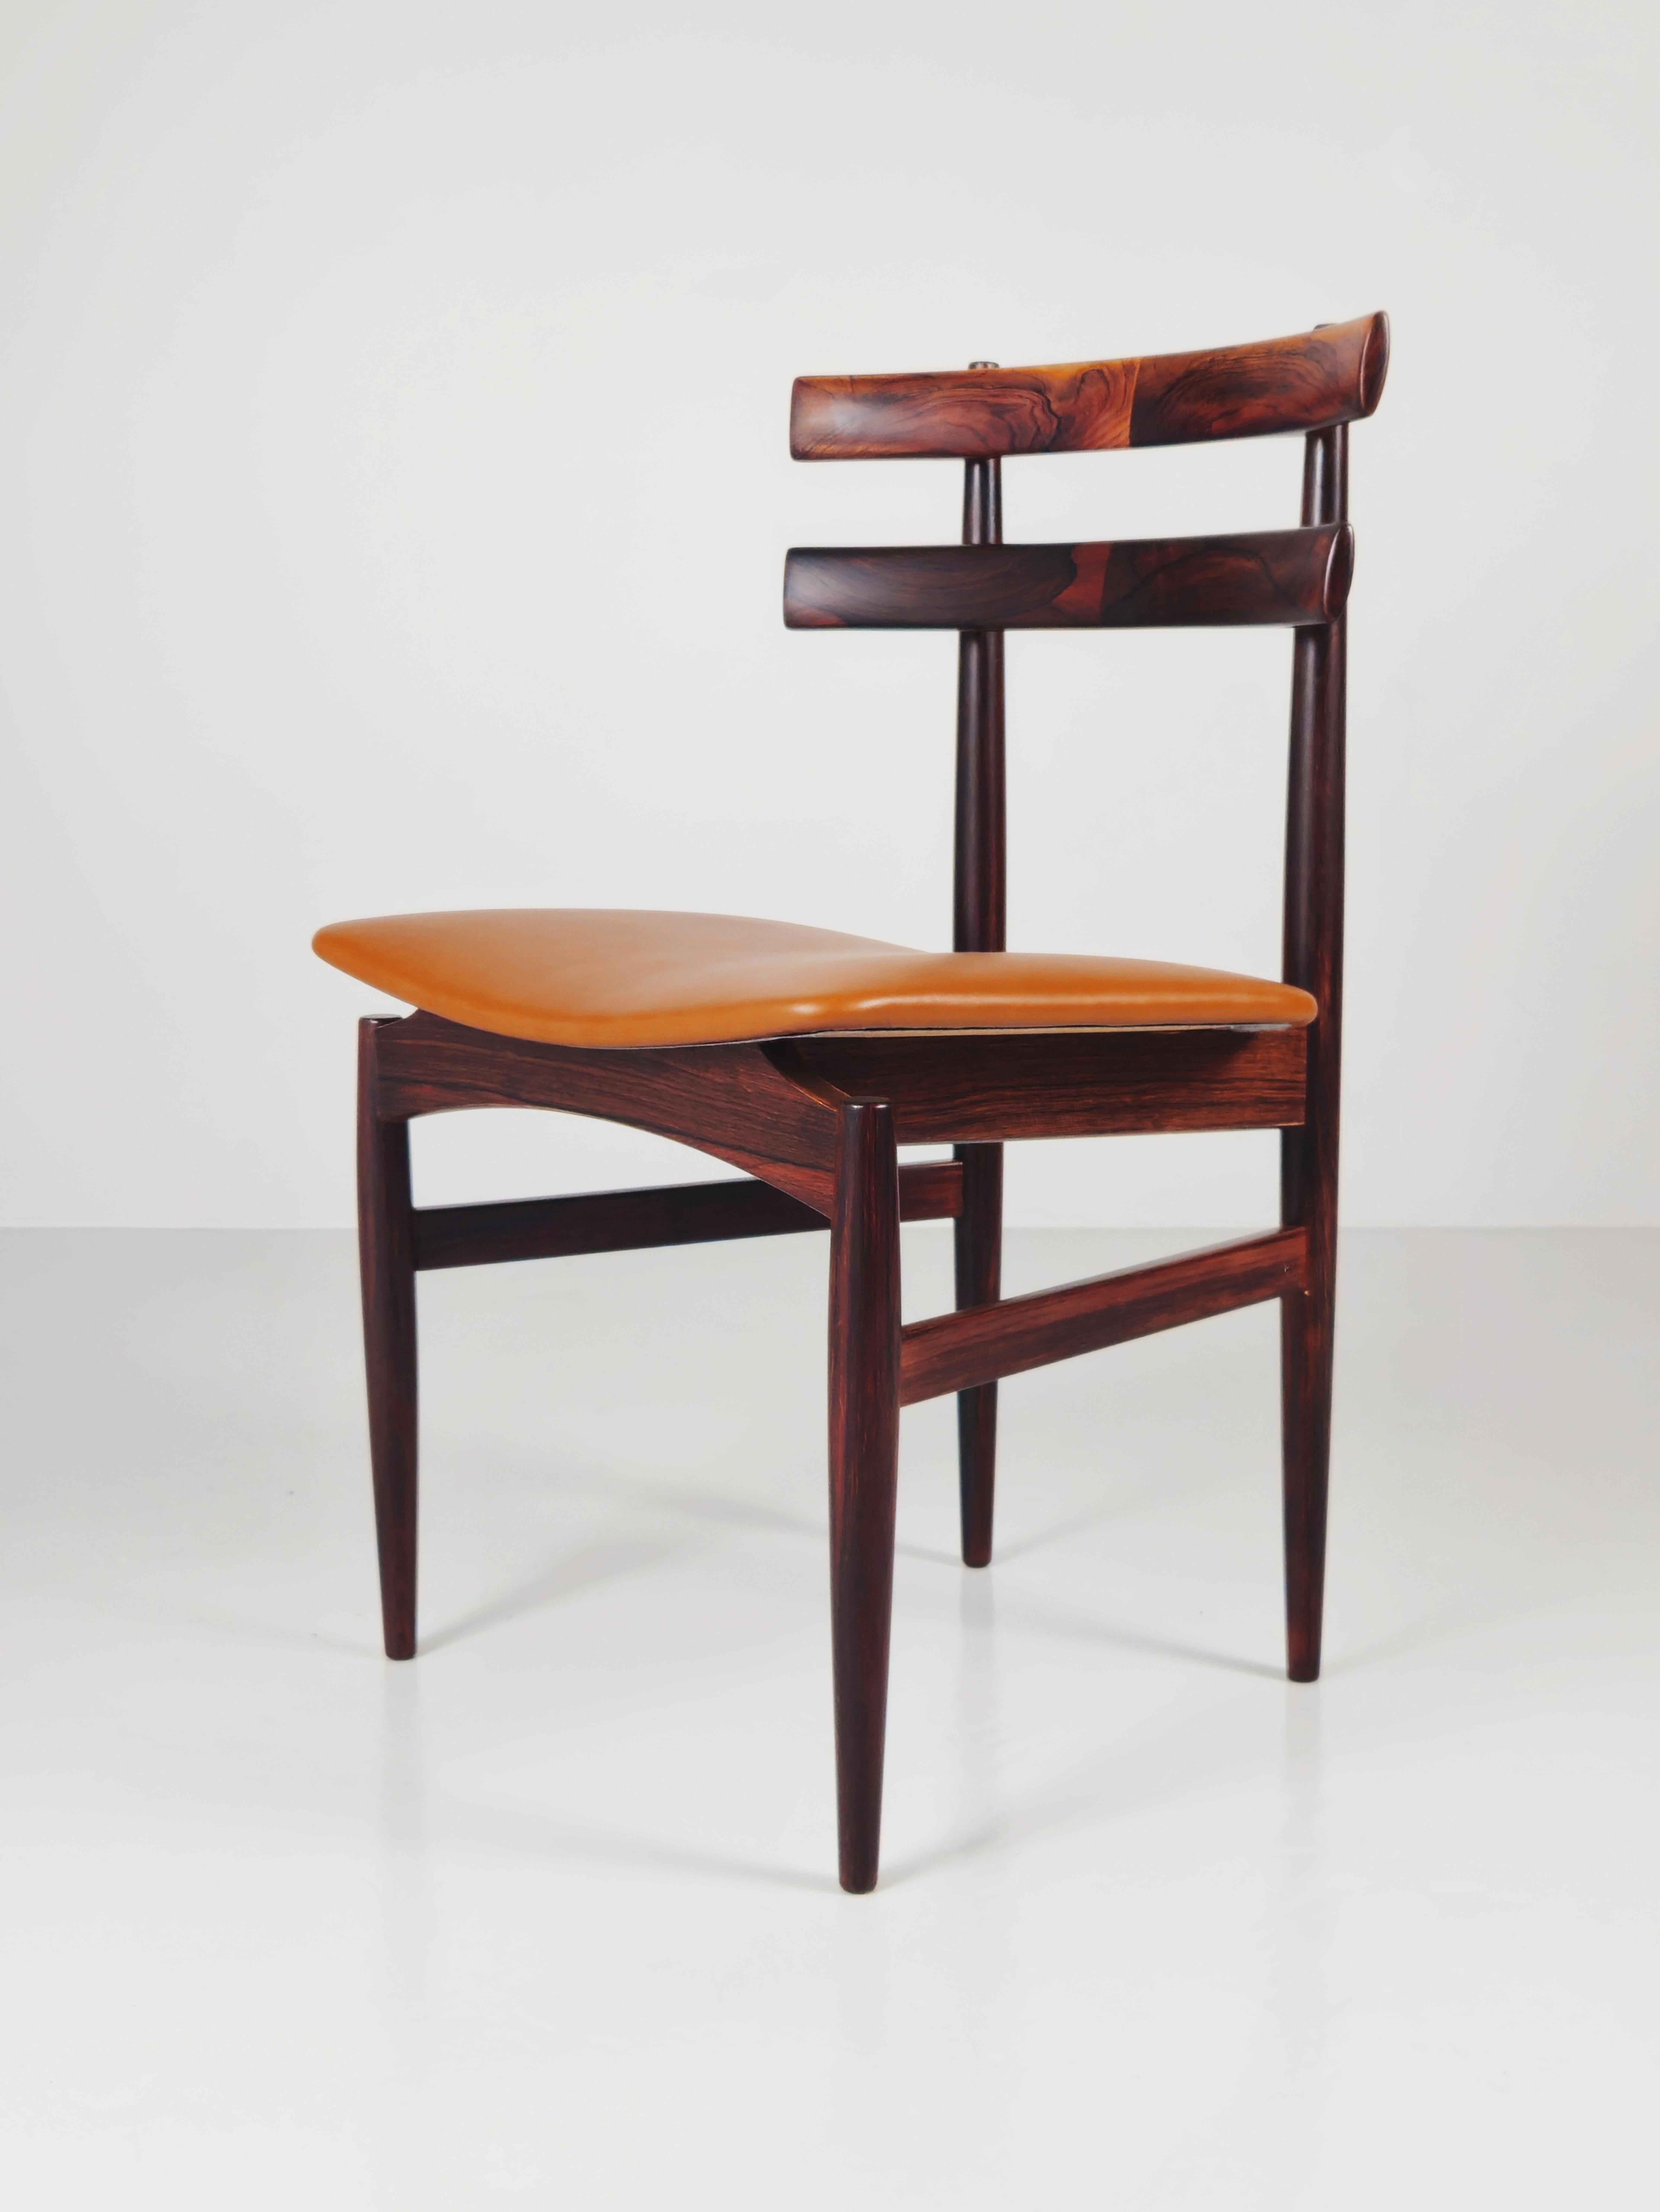 Rare rosewood chair 'Model 30' by Poul Hundevad, Denmark, 1950s For Sale 1